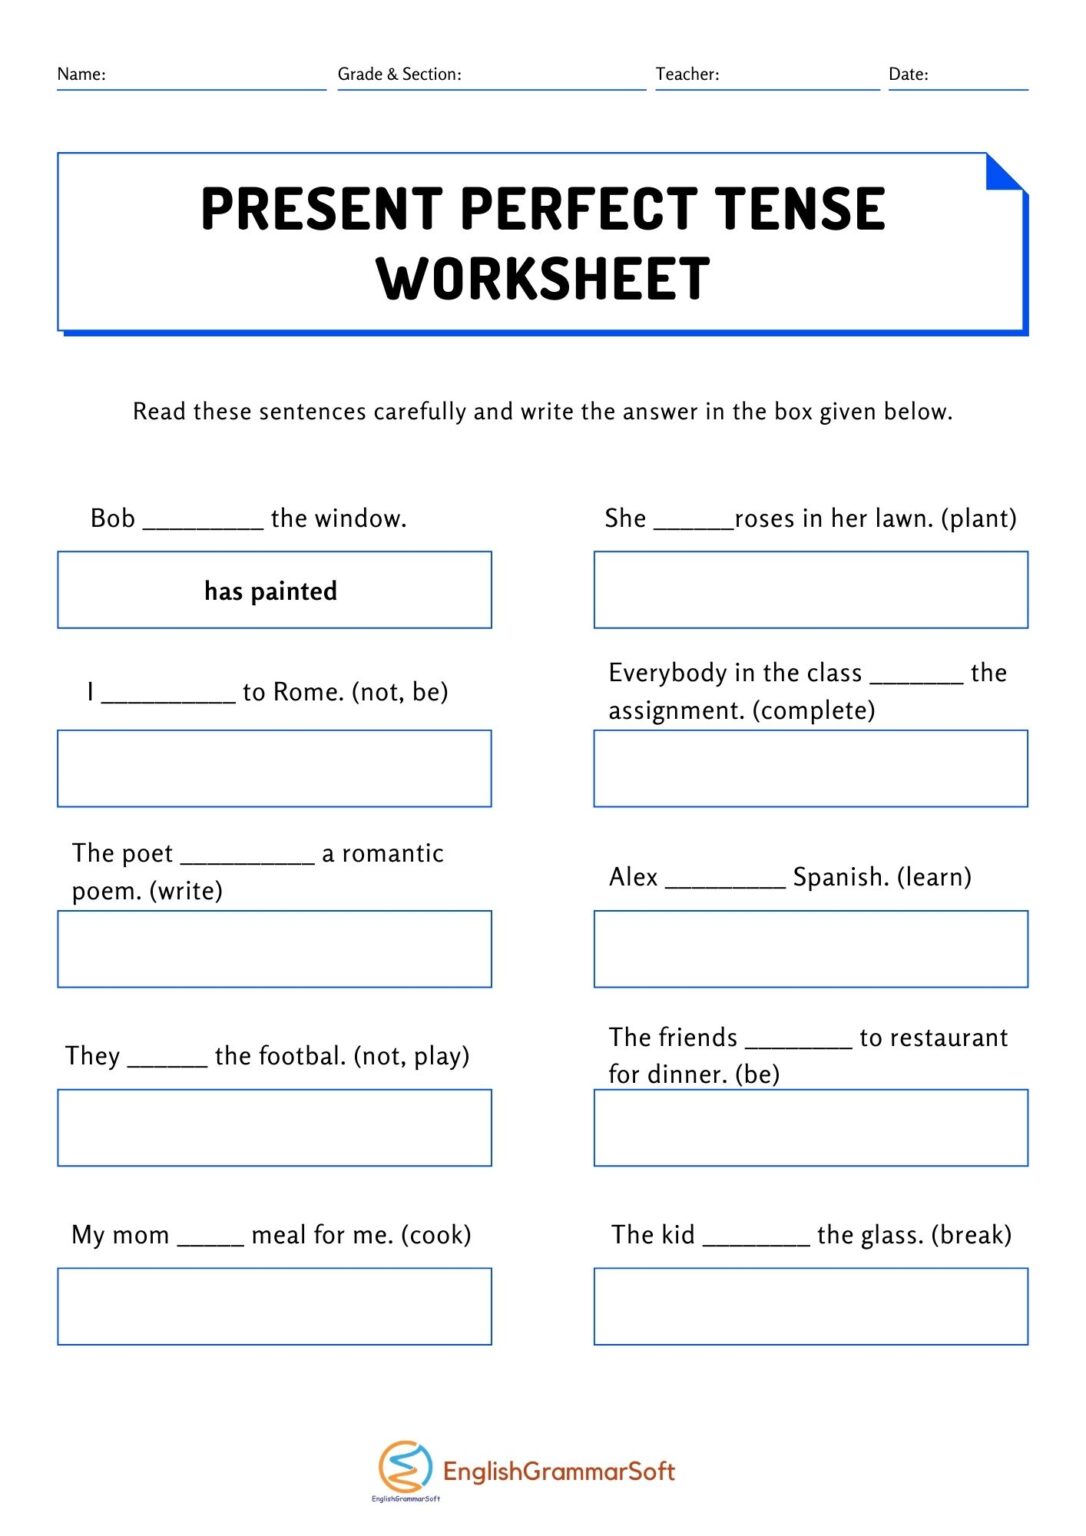 Present Perfect Tense Worksheet With Answers